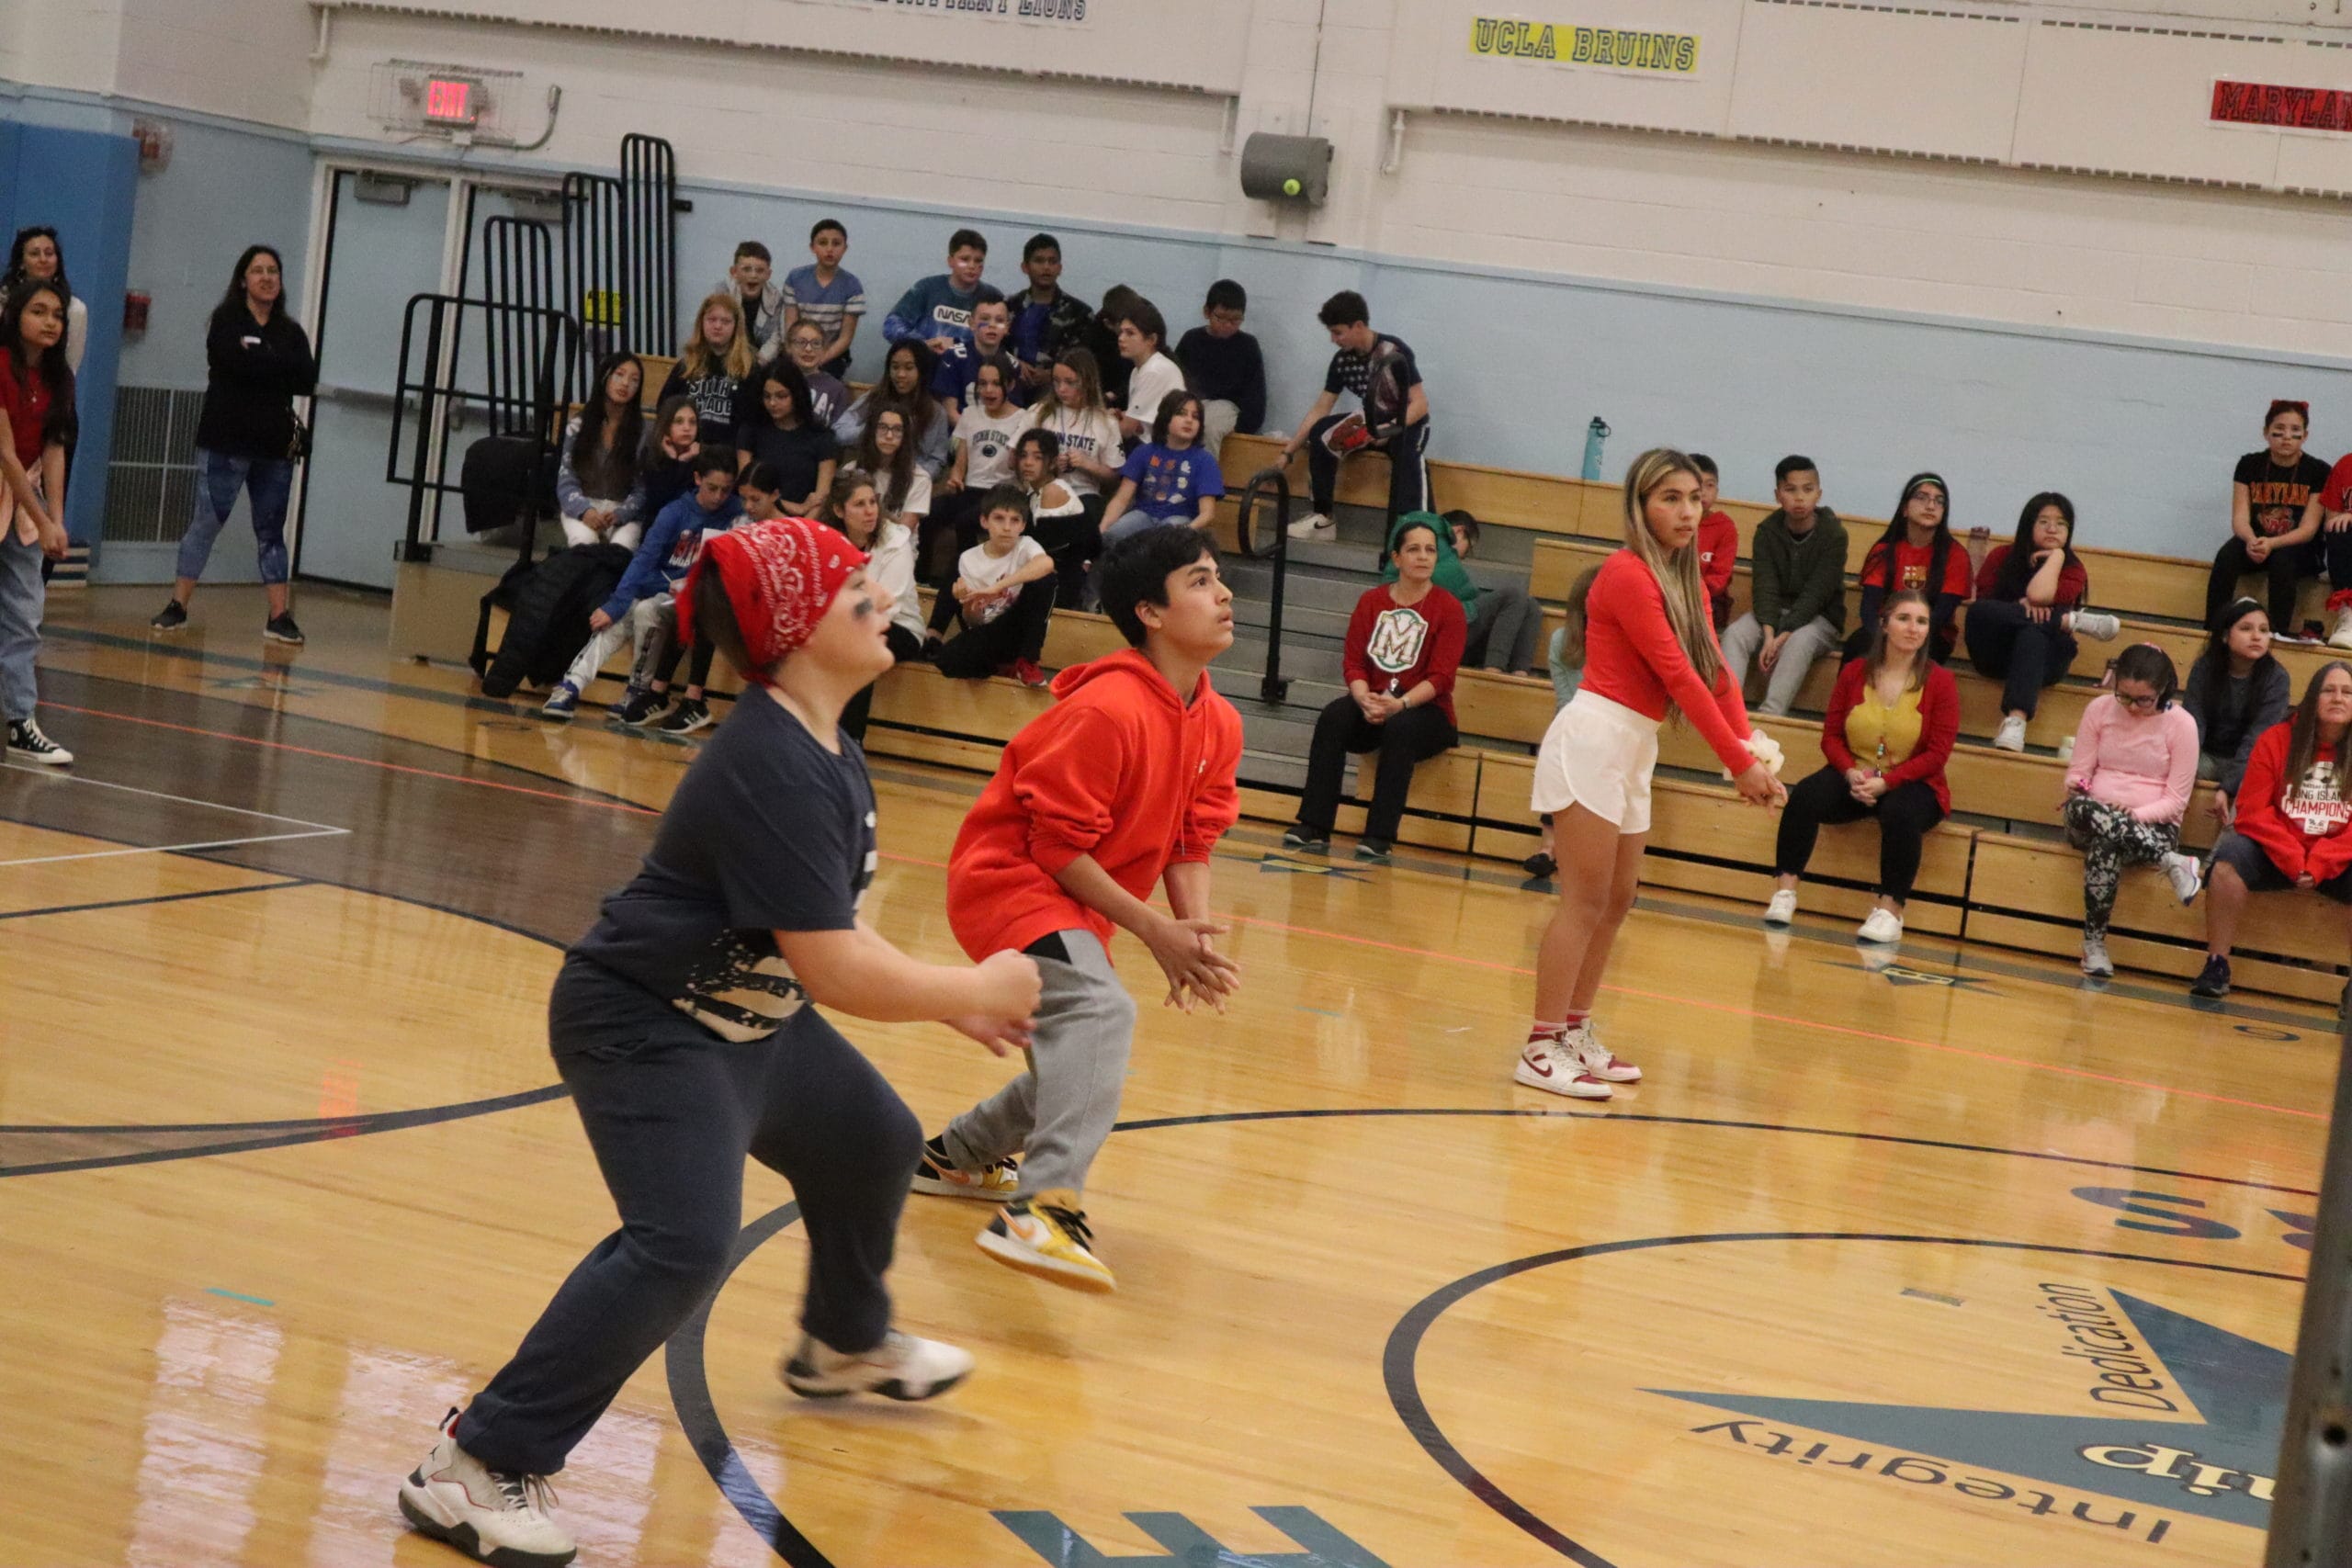 Students Face-Off At Shore Road For College Olympics